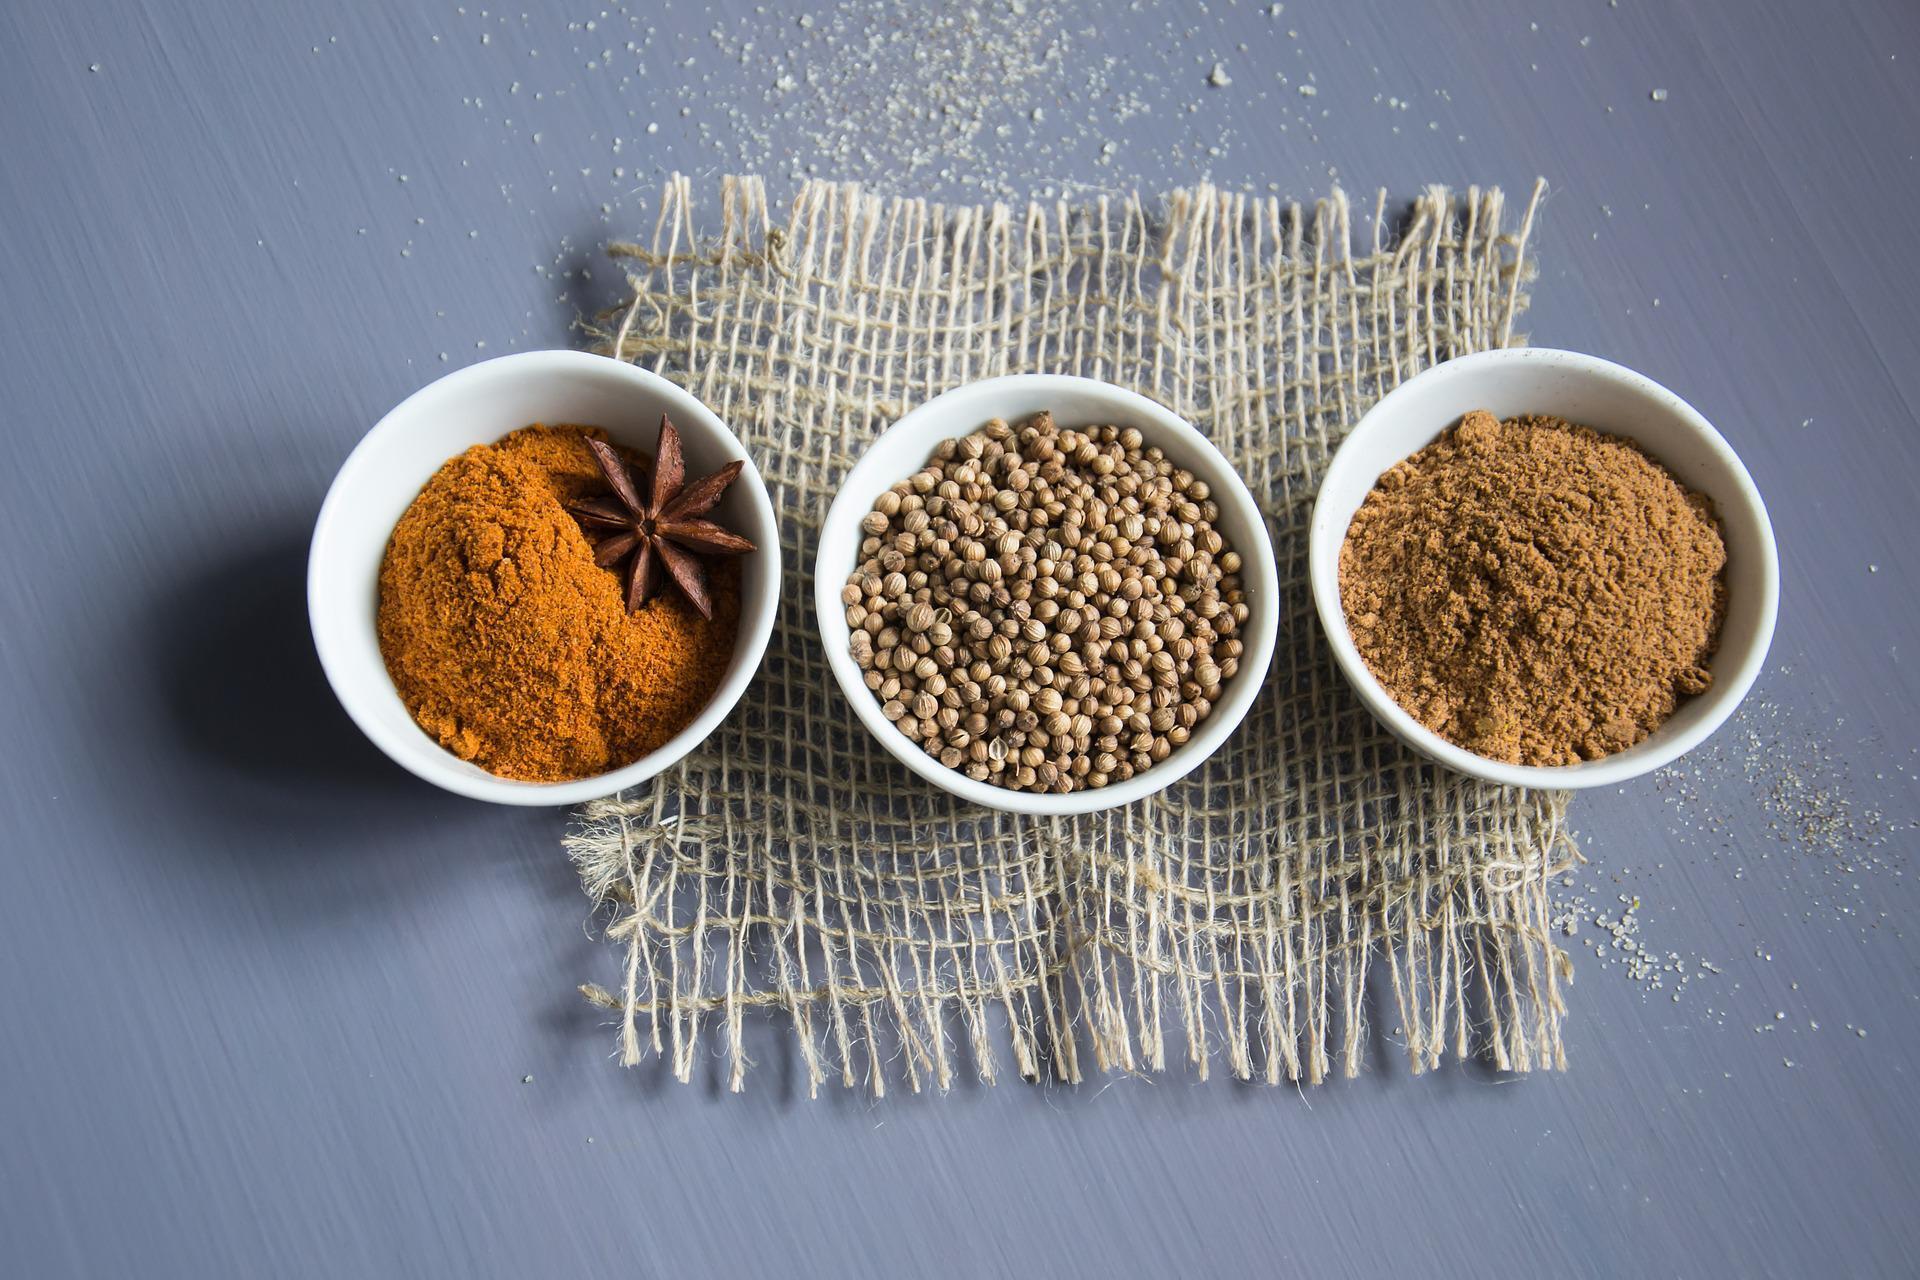 A mixture of aromatic spices